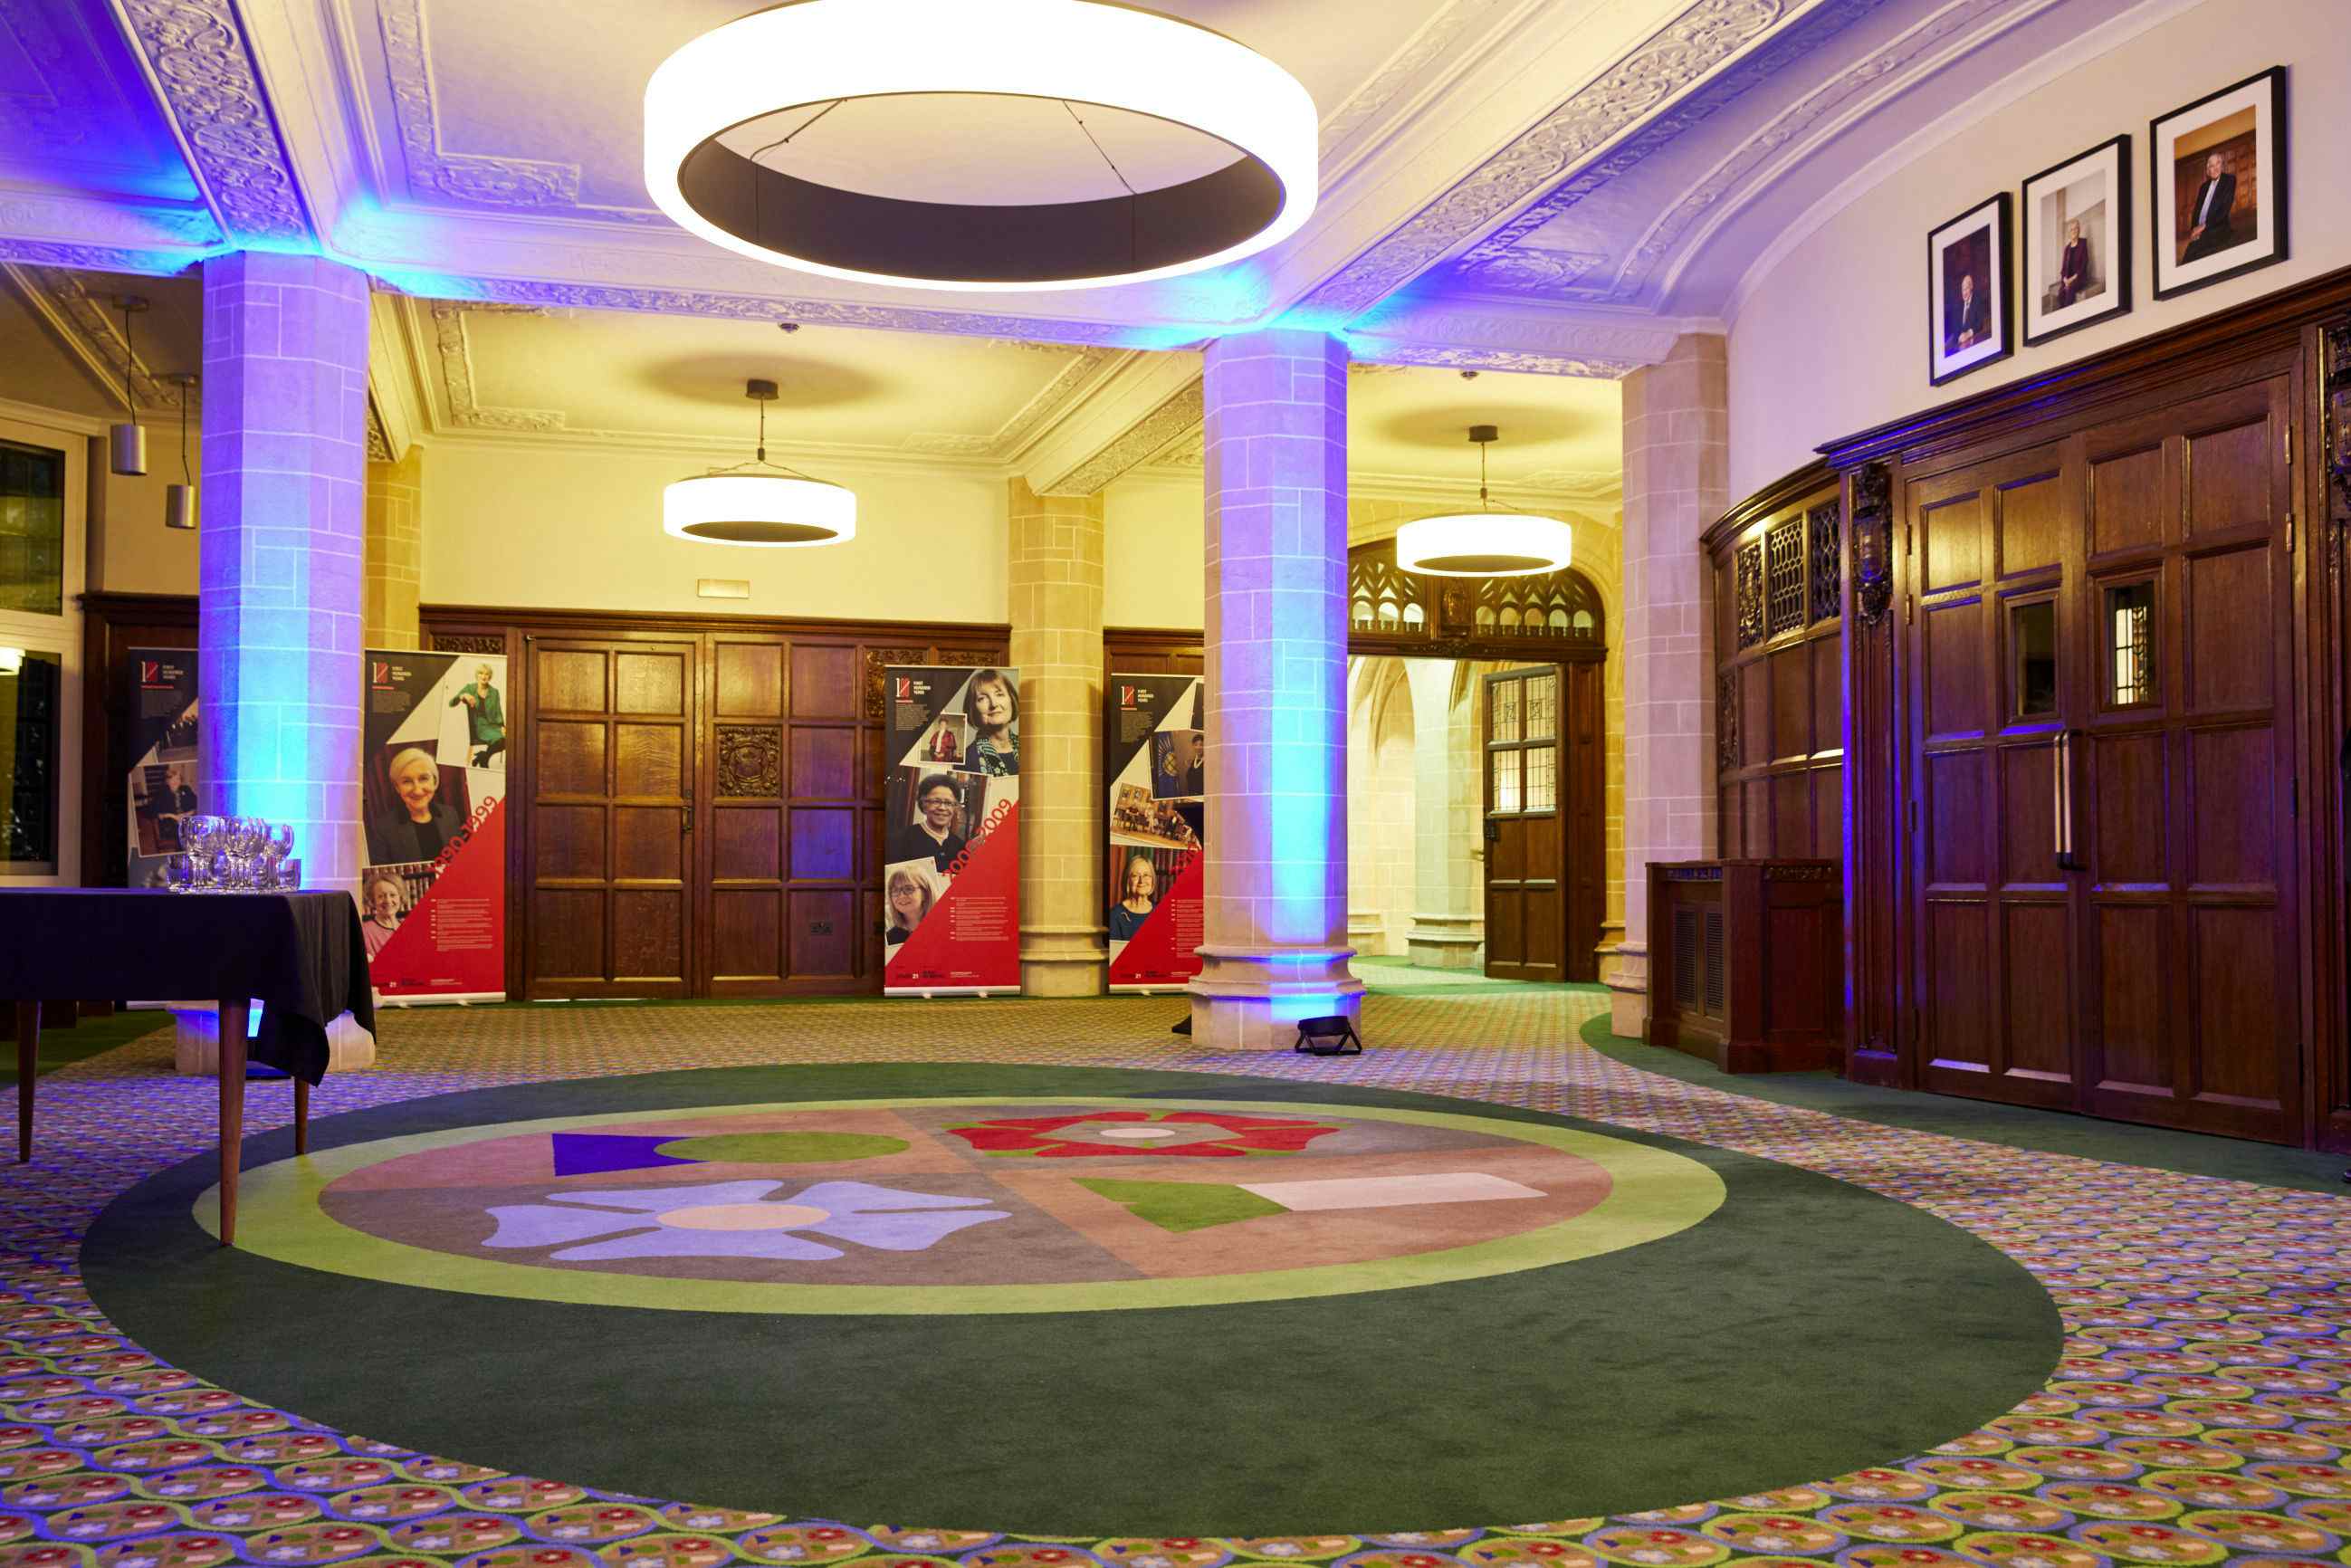 The Lobby, Day Hire, The Supreme Court of the United Kingdom